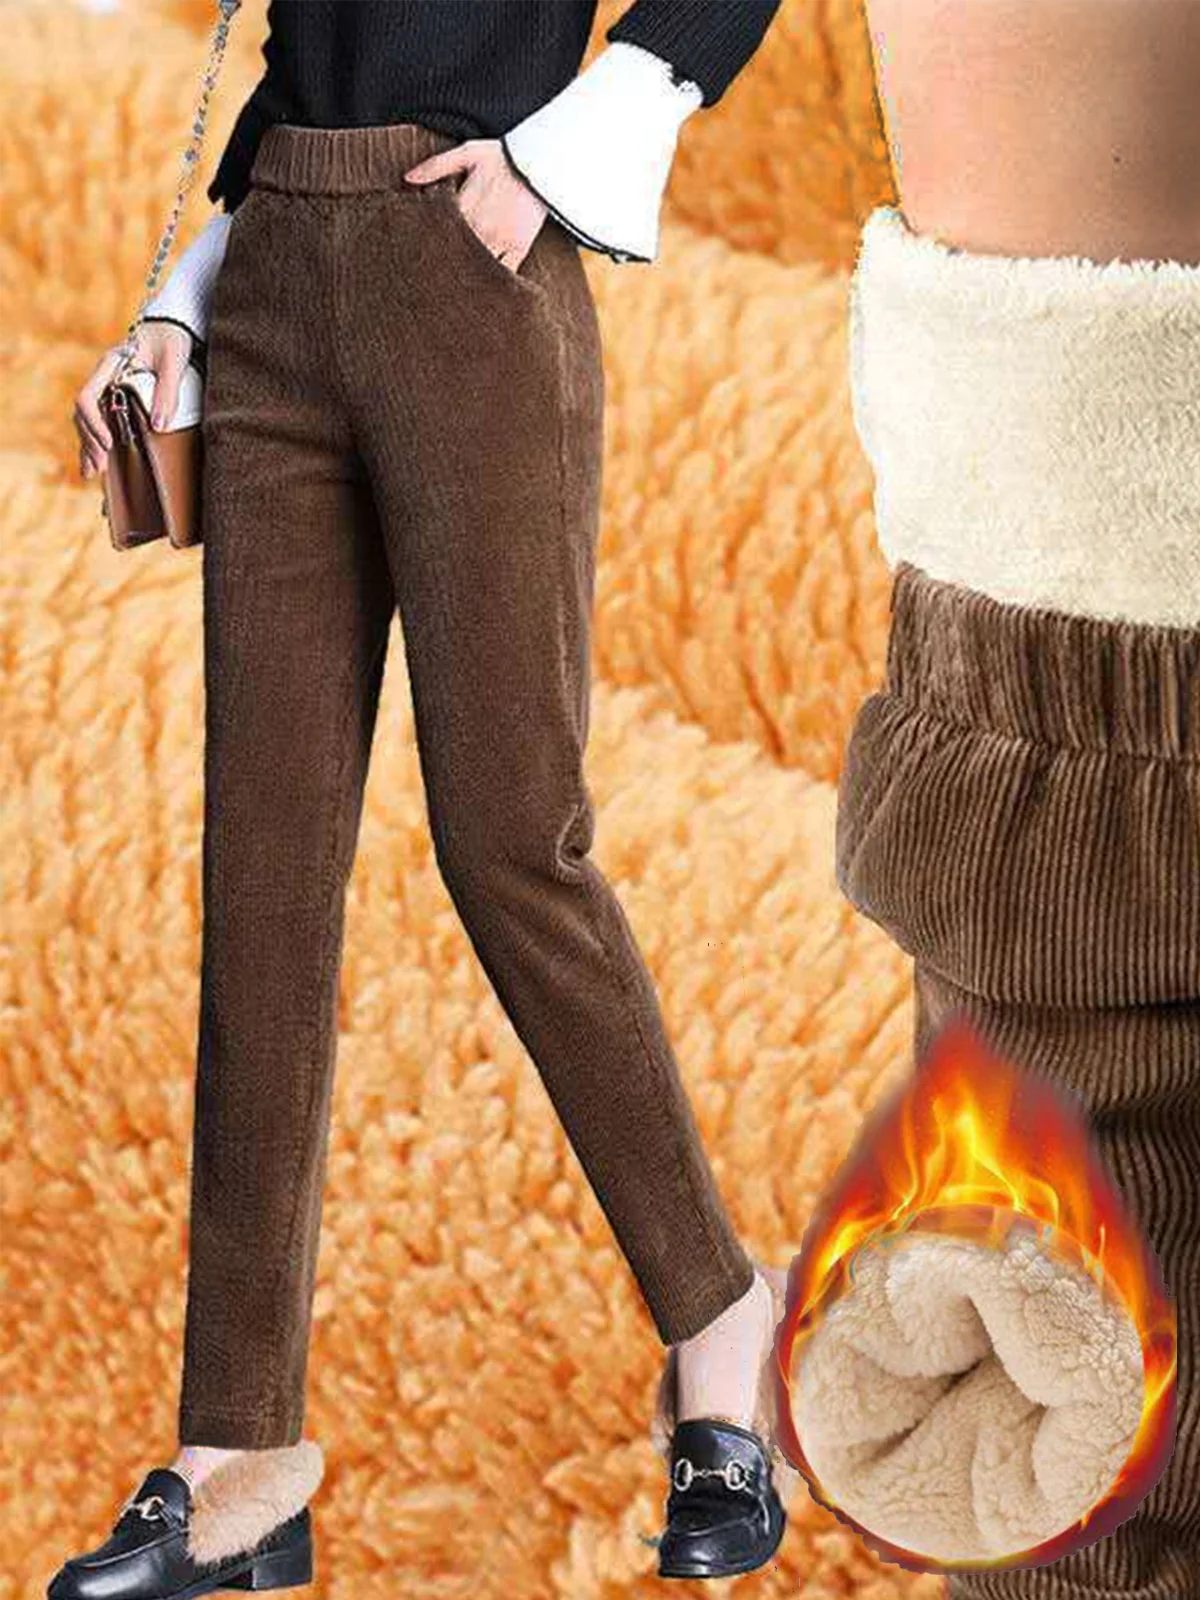 Thermal Fleeced Line Pants With Pockets | justfashionnow